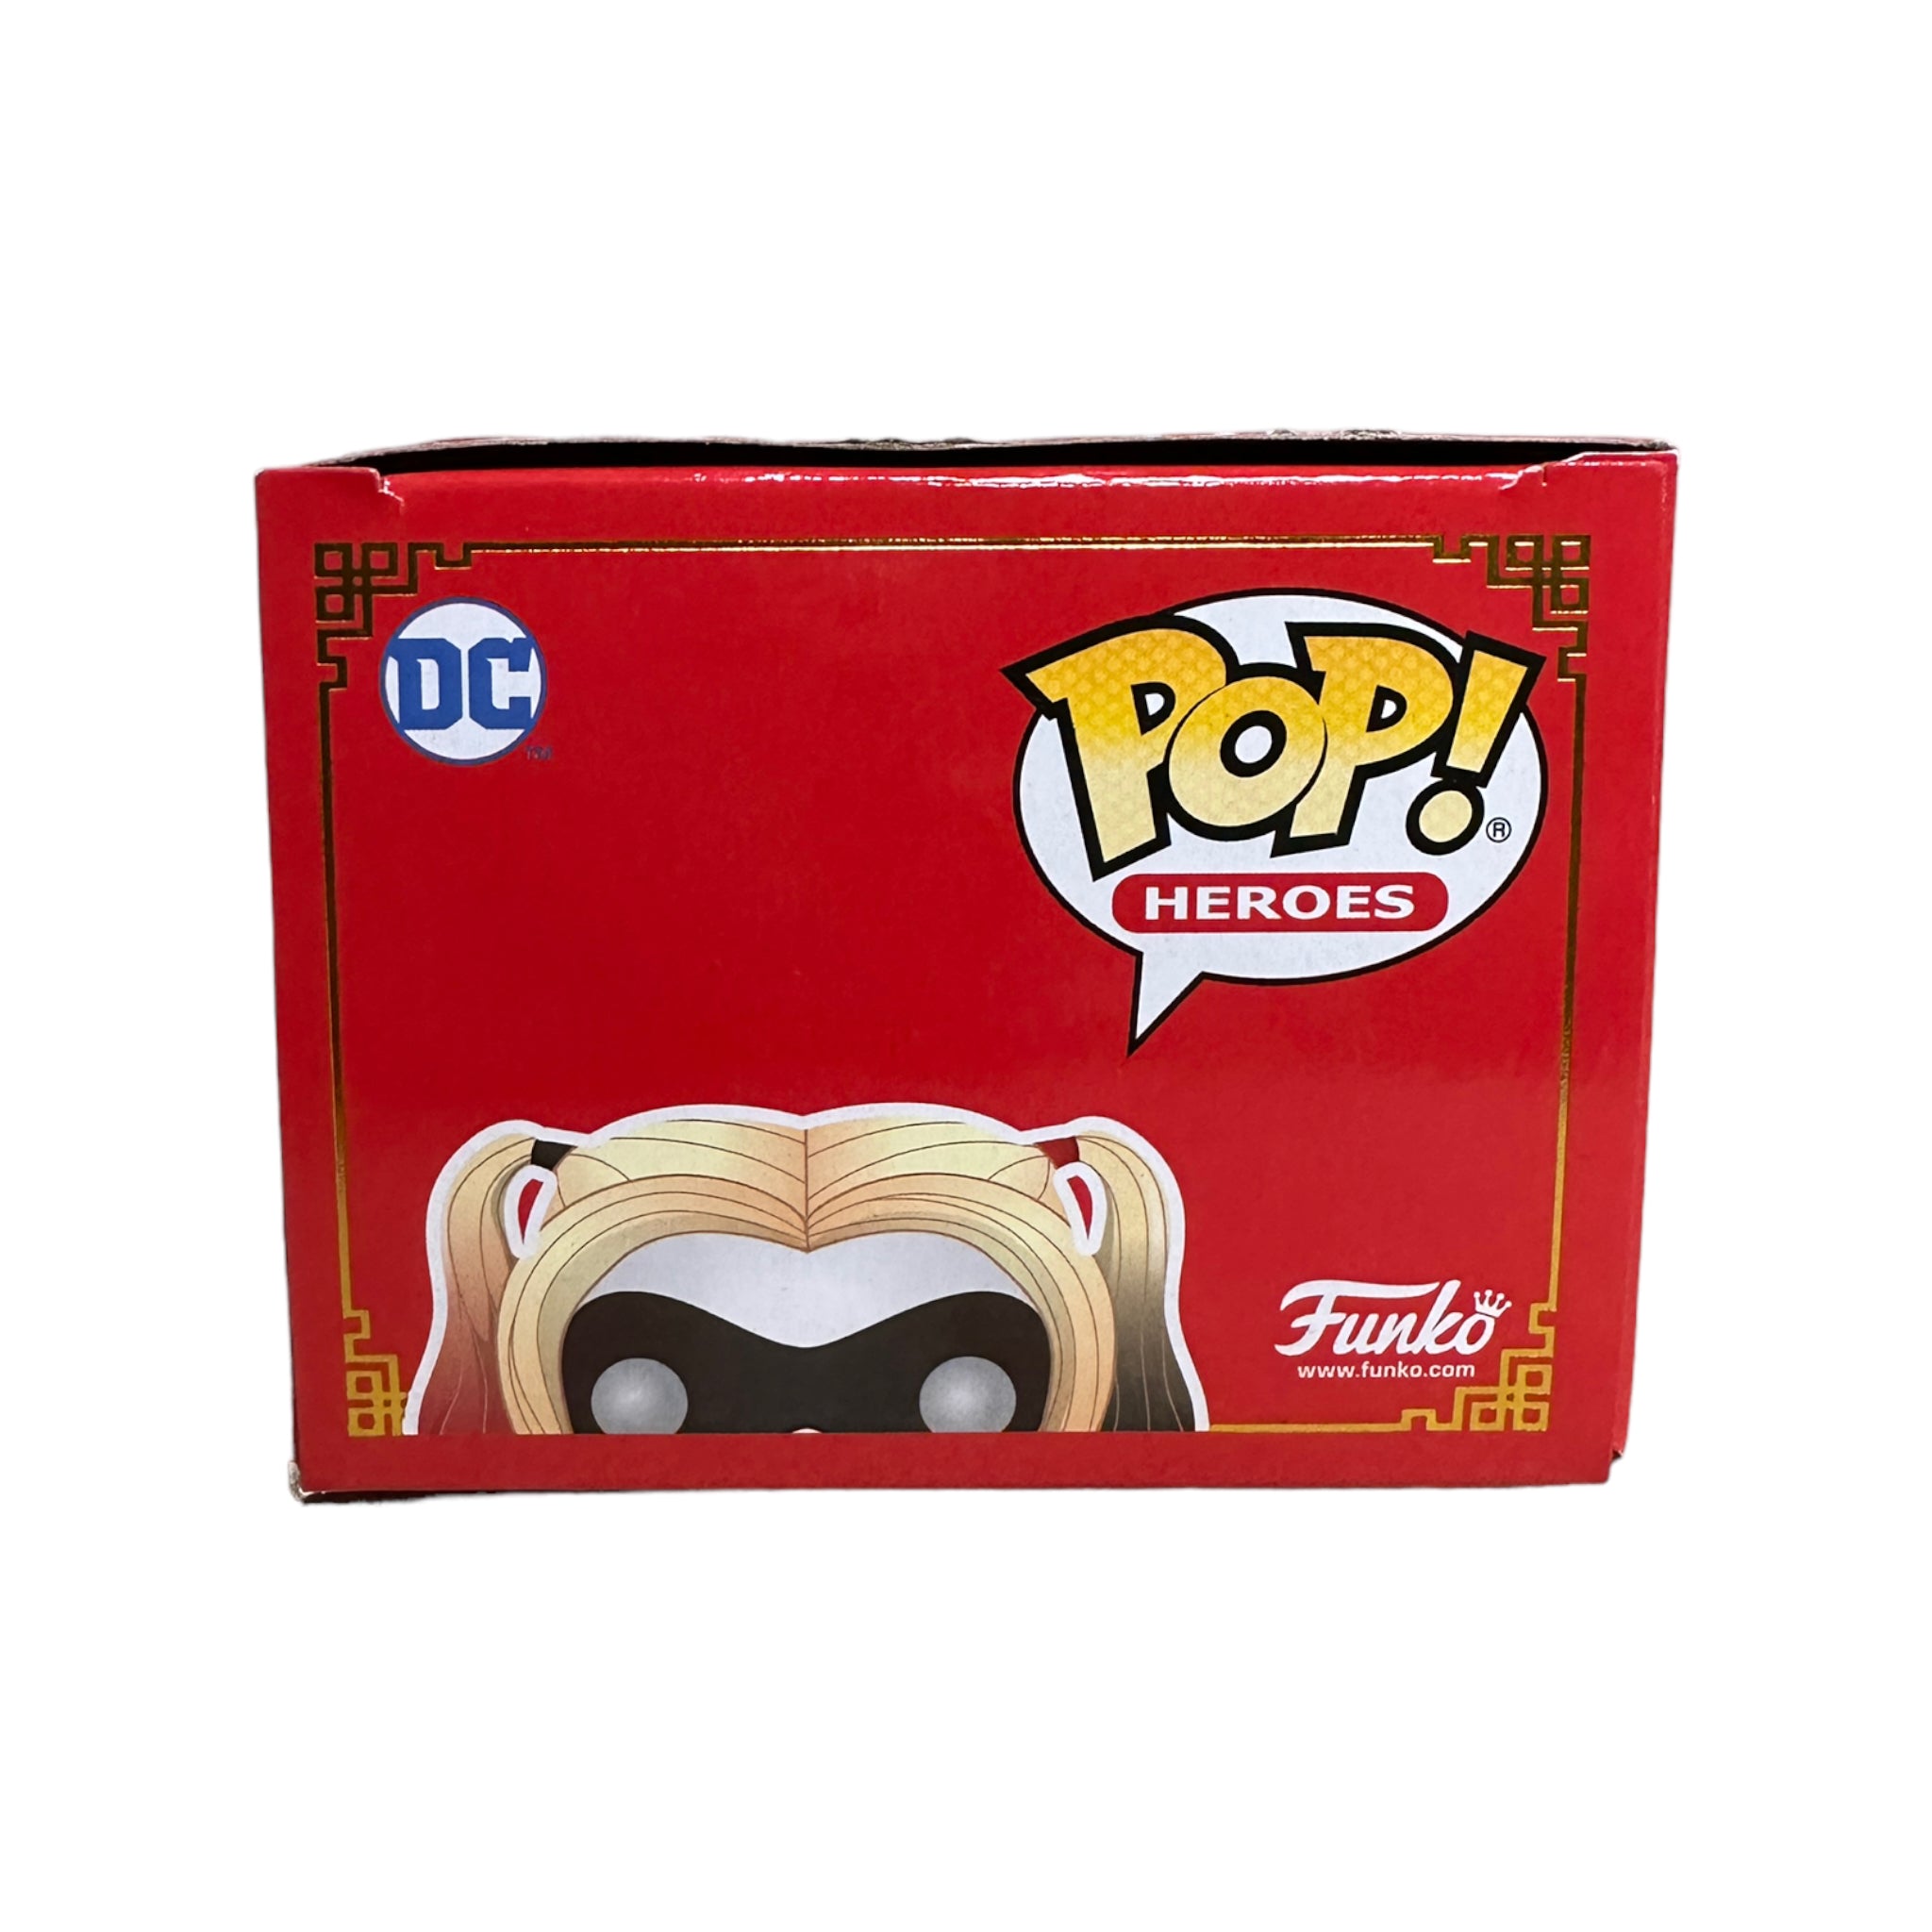 Harley Quinn #376 (Metallic) Funko Pop! - DC Imperial Palace - Asia 2021 Exclusive - Condition 7.5/10